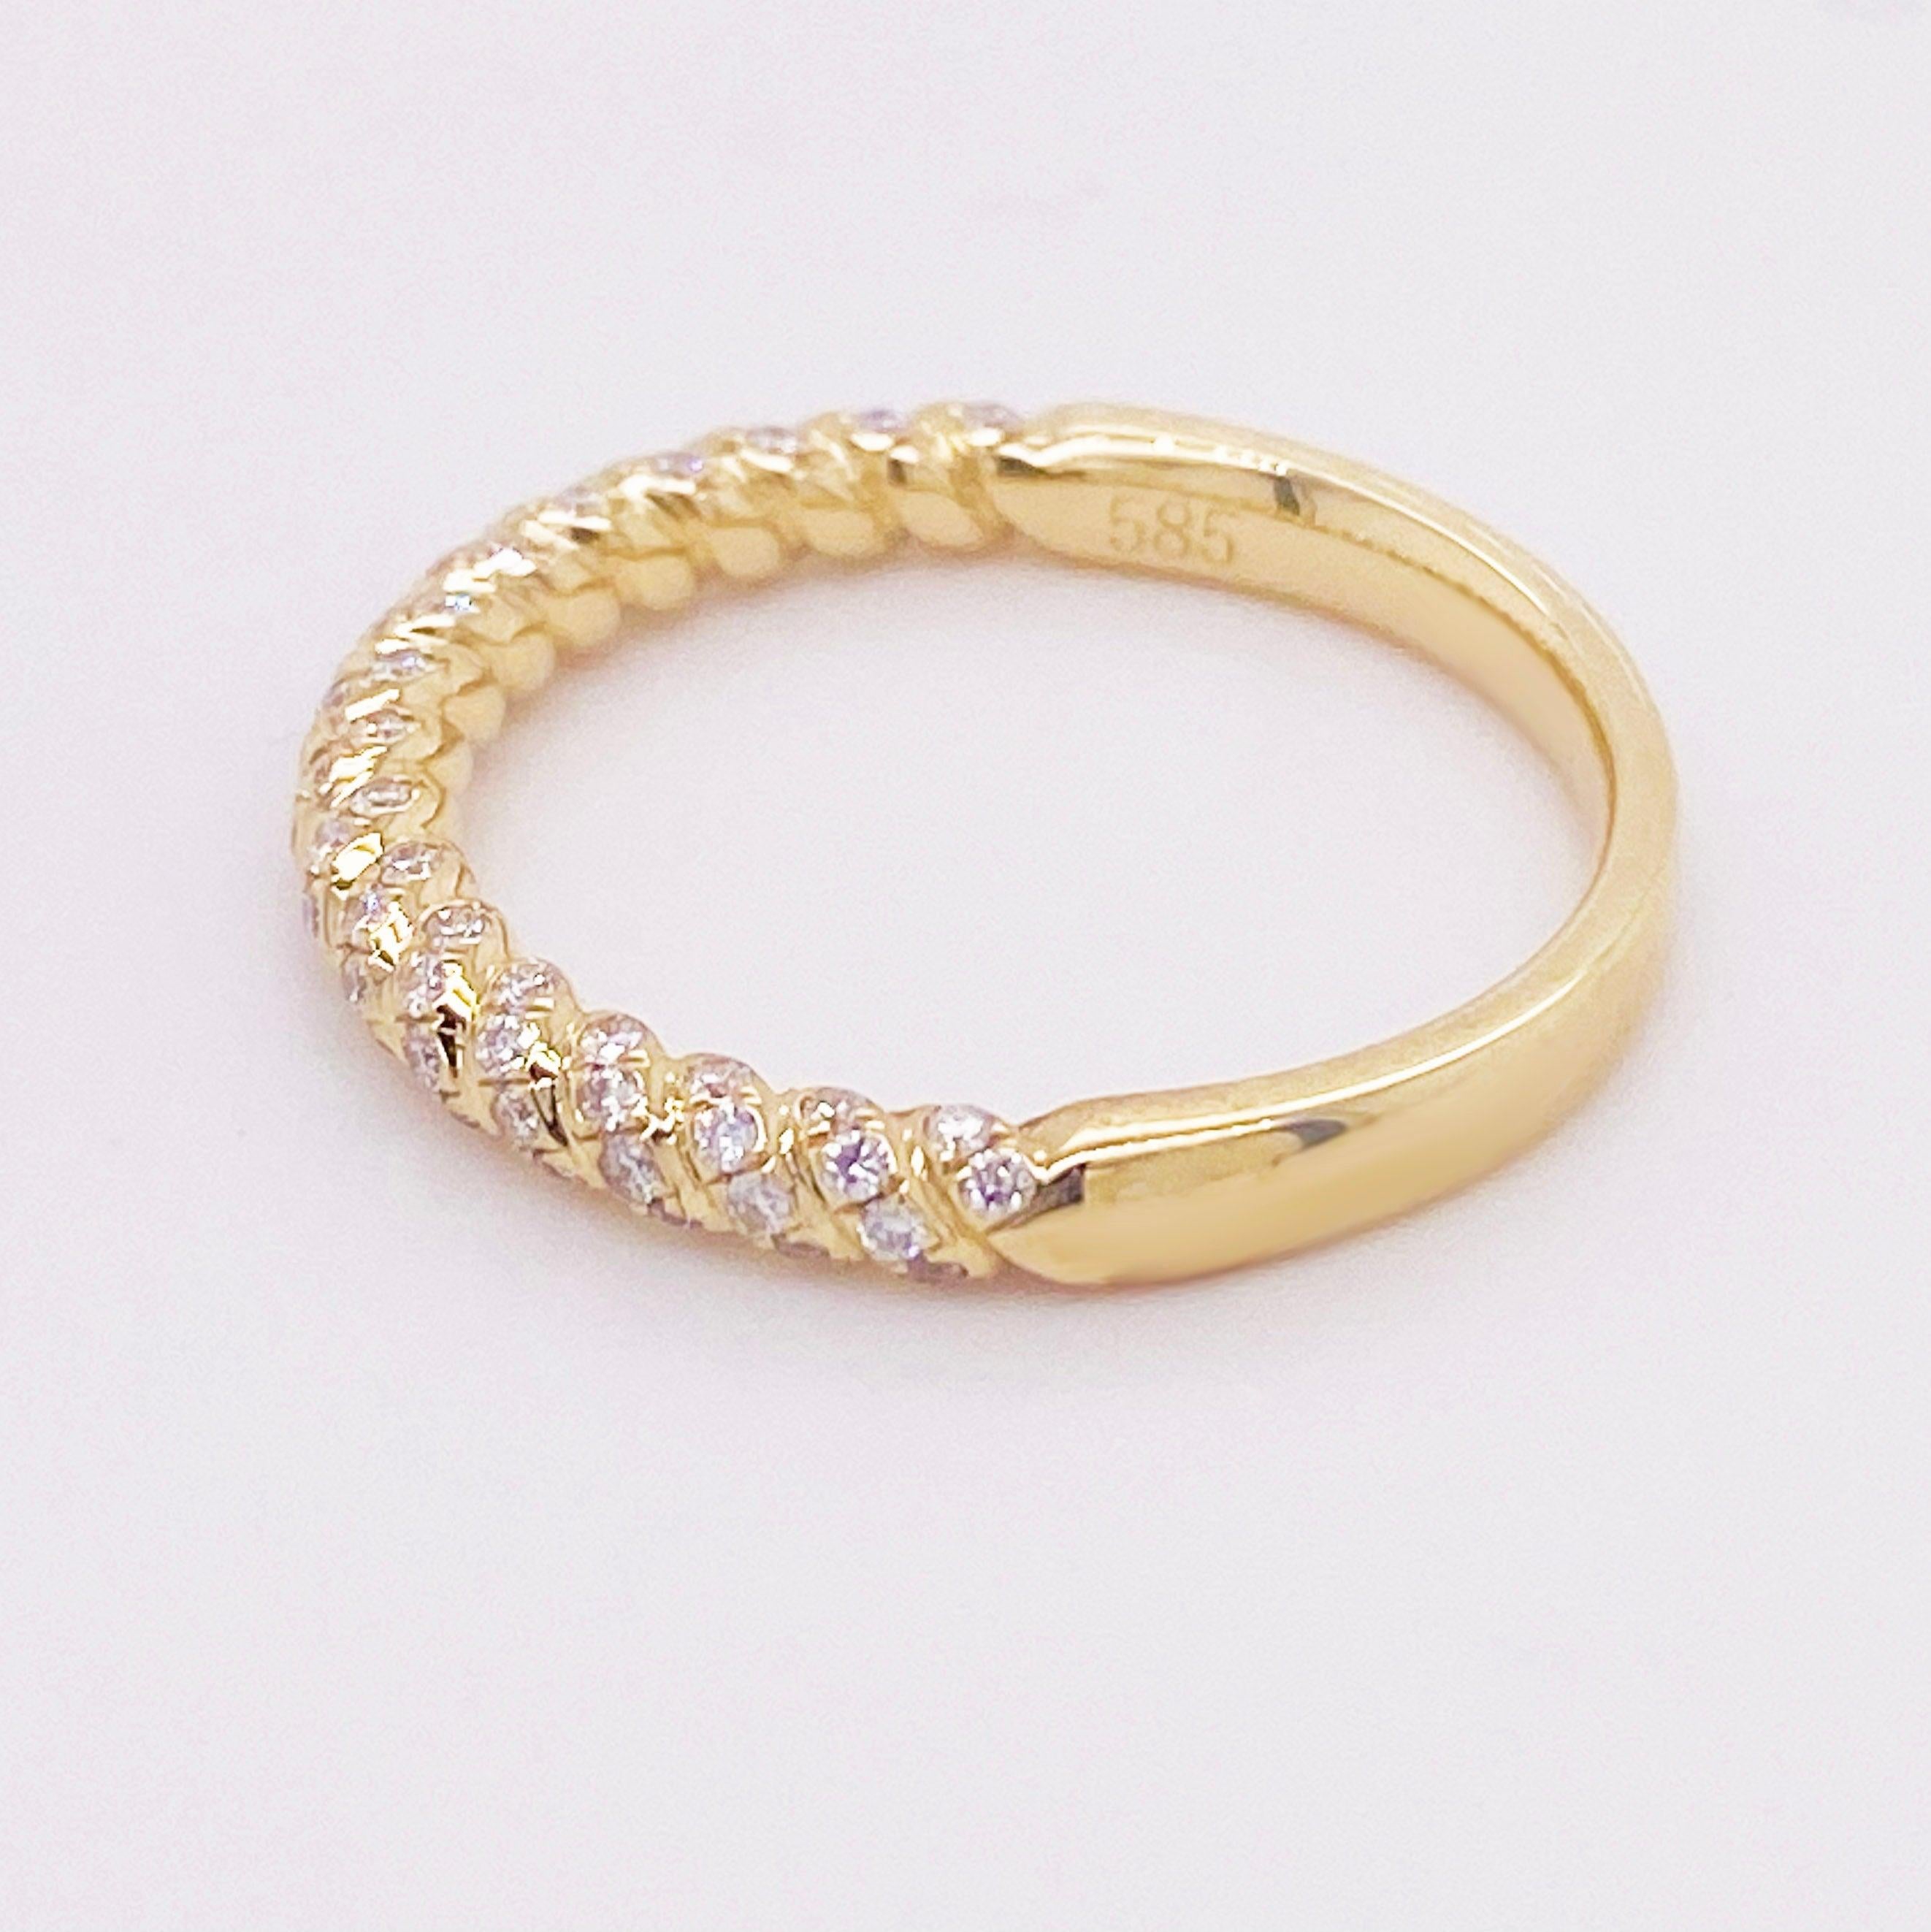 For Sale:  Twisted Diamond Band, 14 Karat Gold, Wedding Band, Twisted Ring, Stackable 5